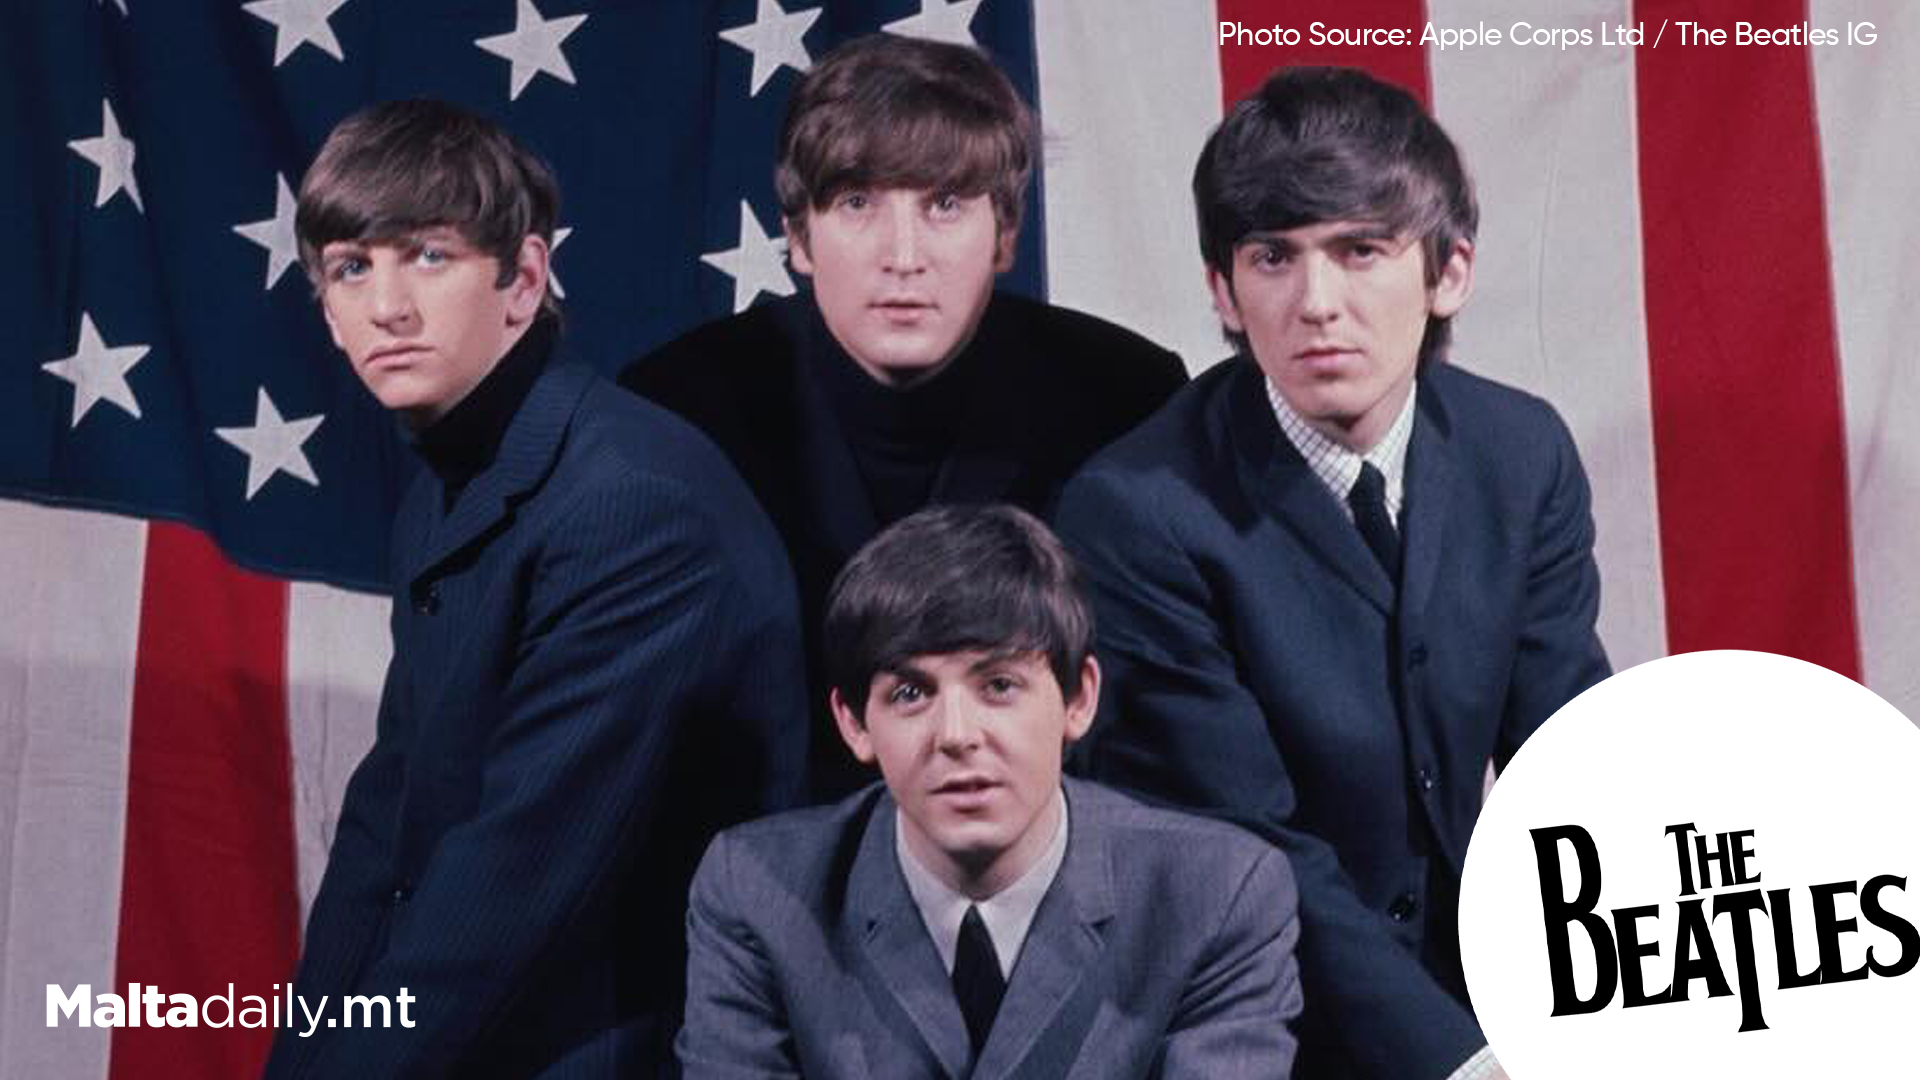 The Beatles set record 54-year gap between No 1 singles as Now and Then tops UK chart